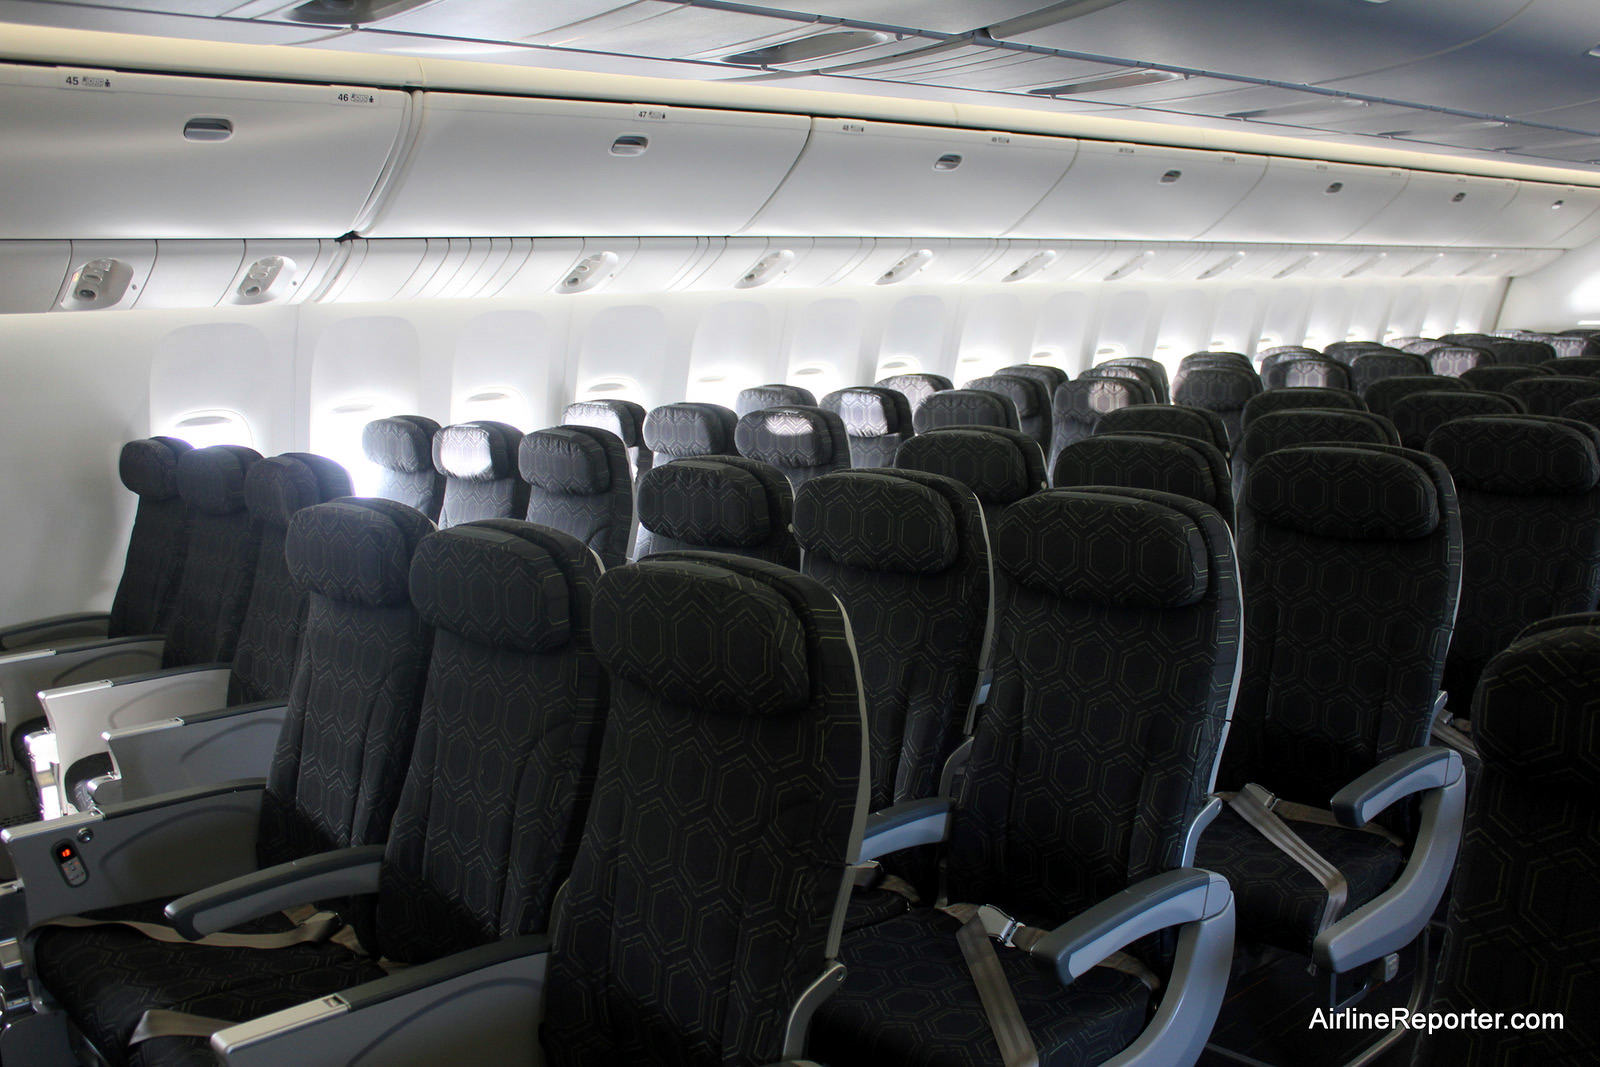 Inside Look: 9 vs 10 Abreast Economy Seating in the 777 : AirlineReporter1600 x 1067